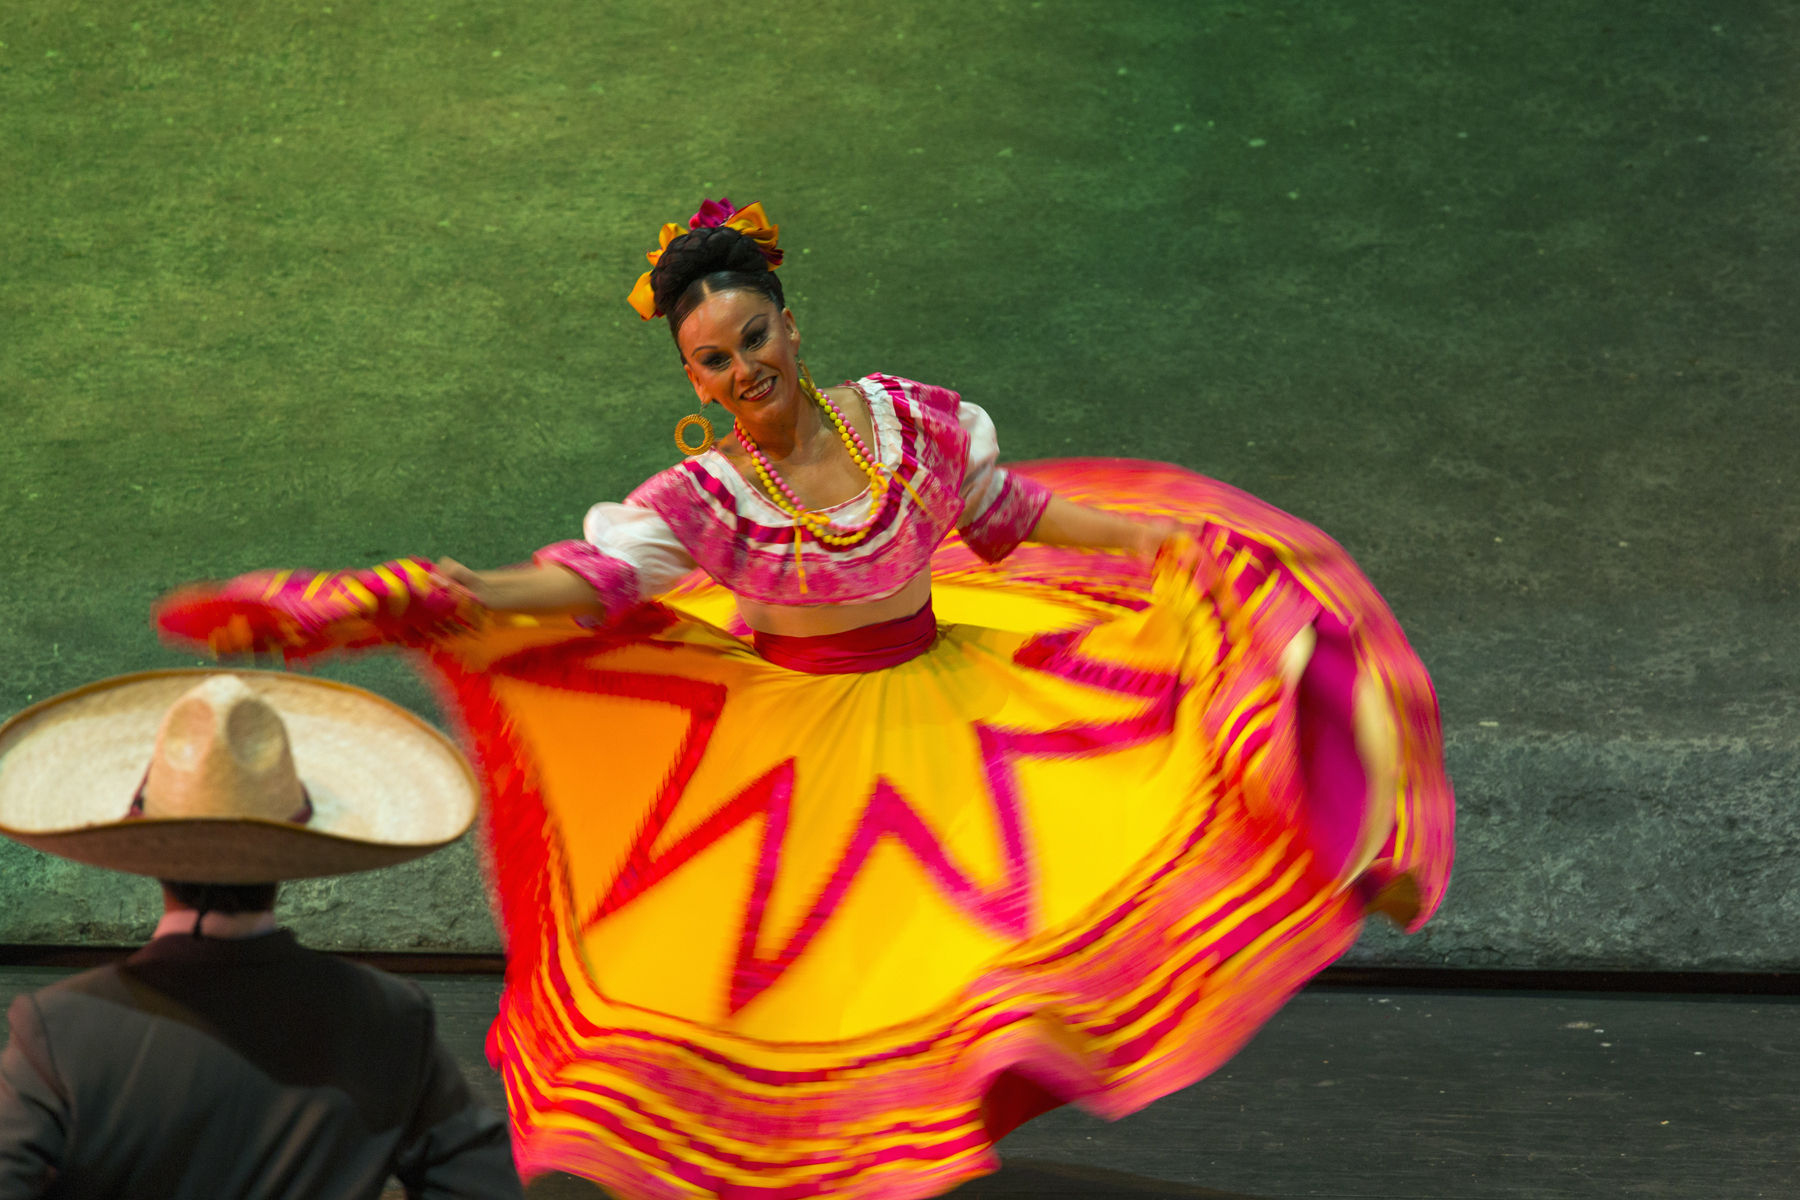 traditional cultural dance from the state of Tobasco "Son de La Negra" performed at Xcaret Mexico Espectacular